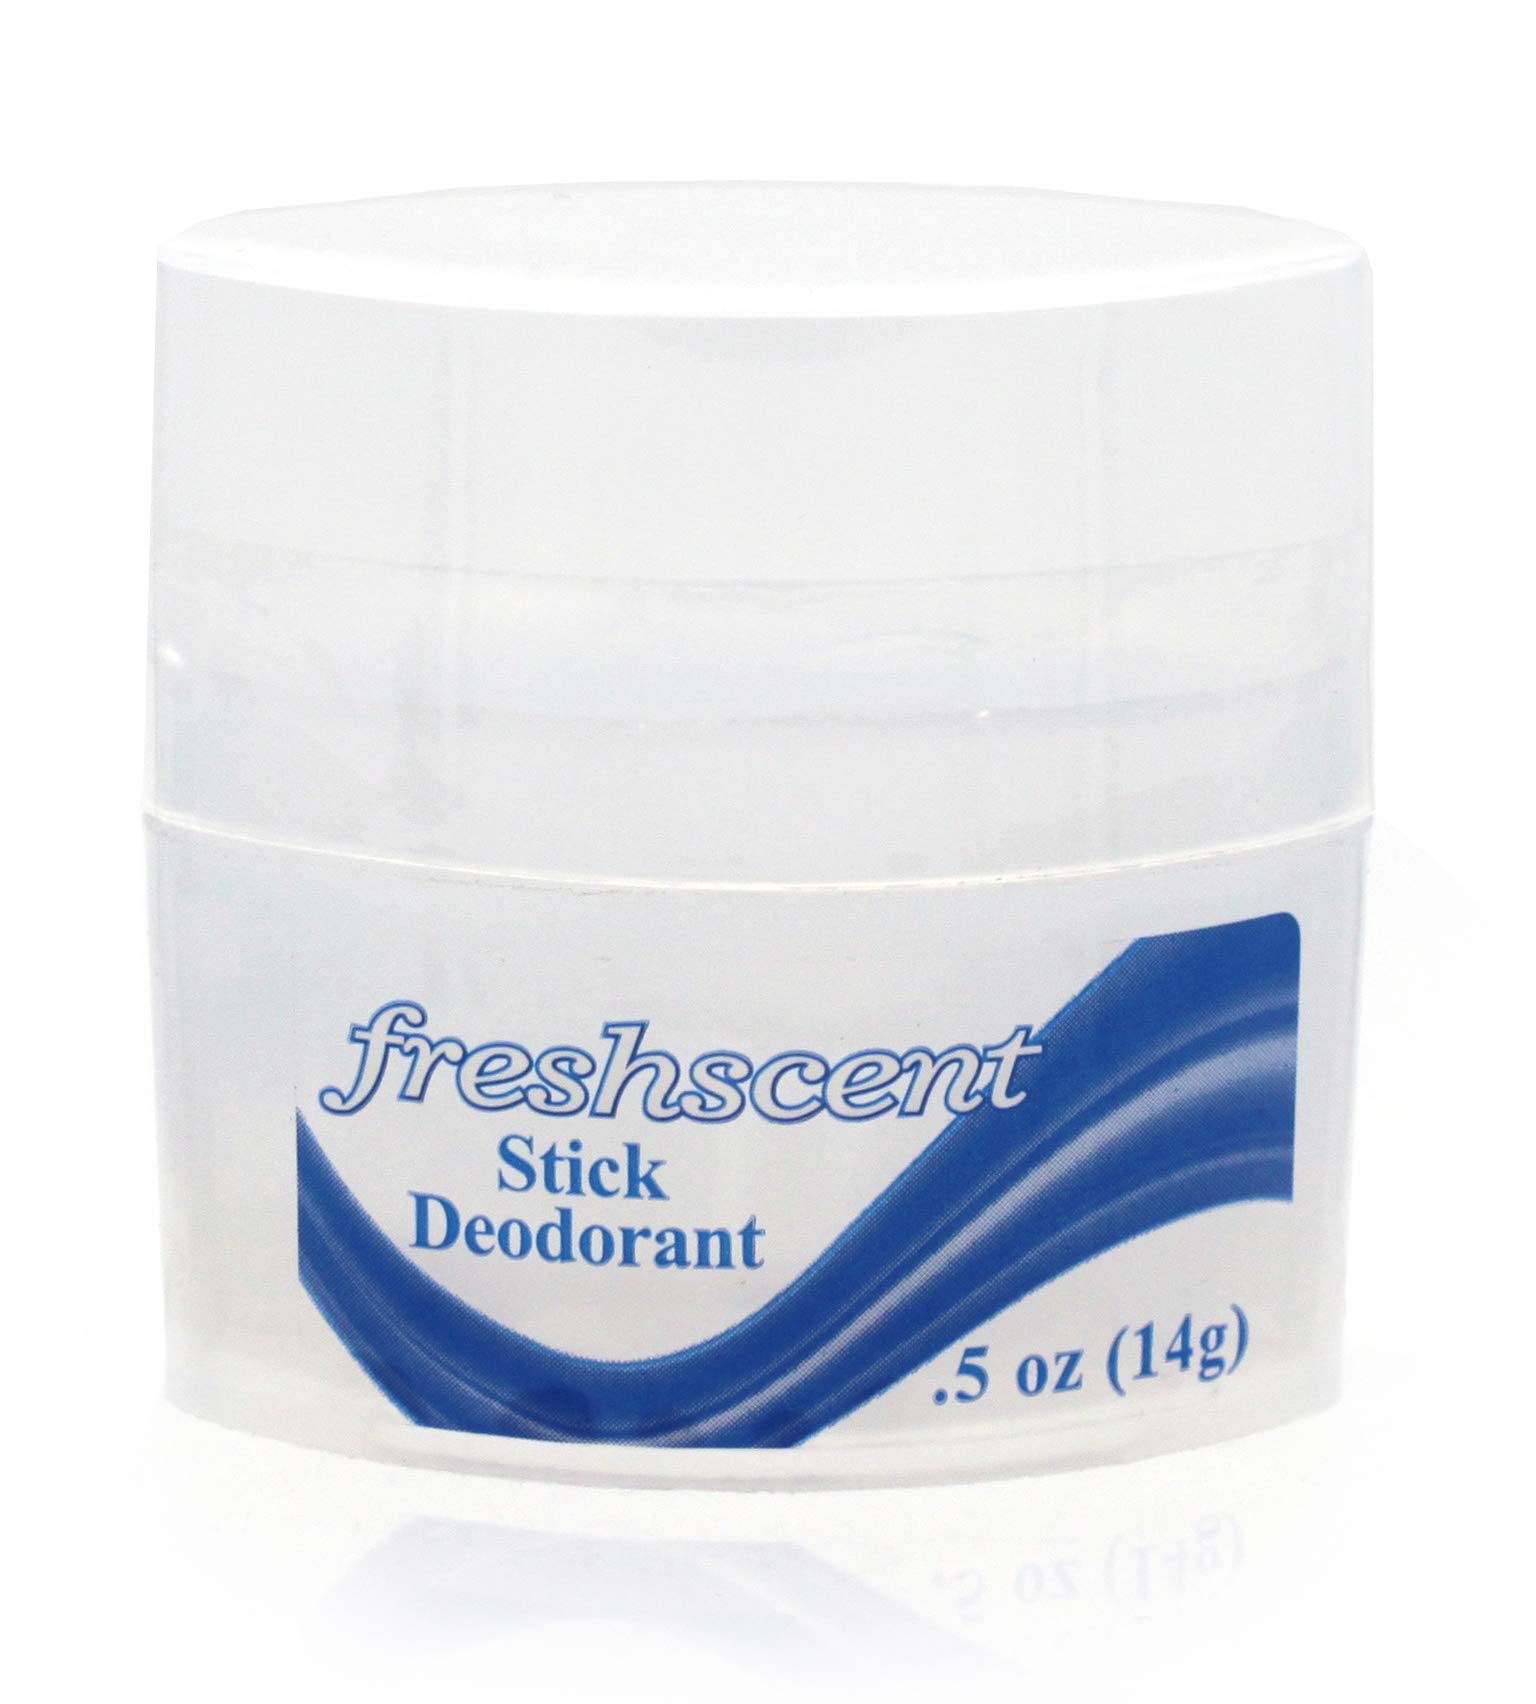 (144 Pack) Freshscent 0.5 oz. Stick Deodorant, Travel Size, Alcohol Free, light fragrance, bulk packed and perfect for donations.